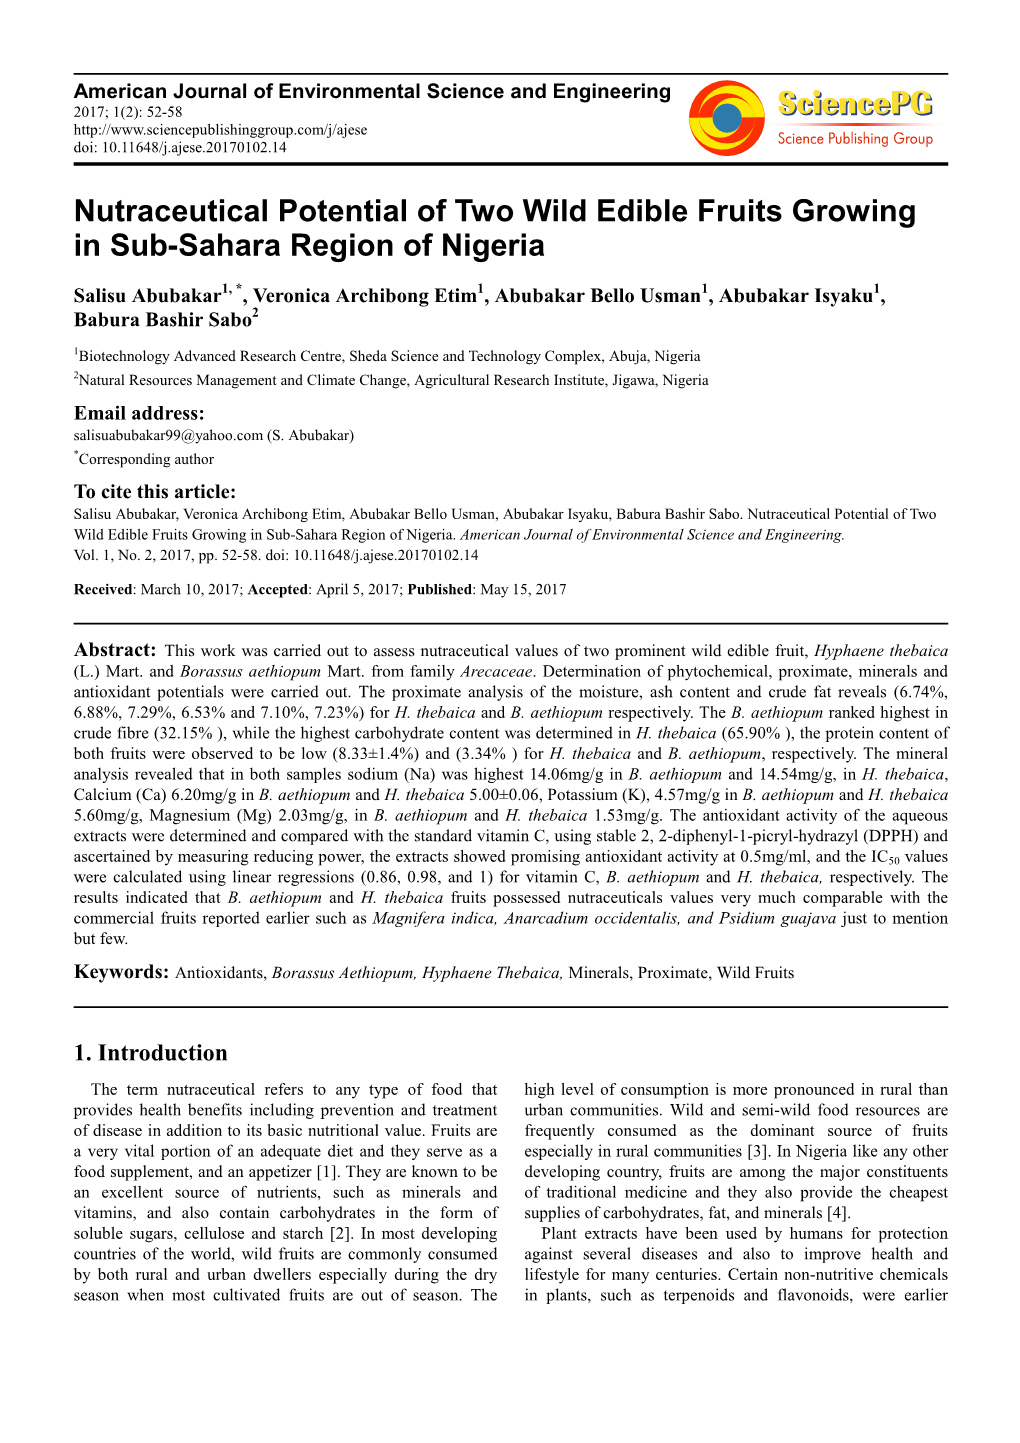 Nutraceutical Potential of Two Wild Edible Fruits Growing in Sub-Sahara Region of Nigeria